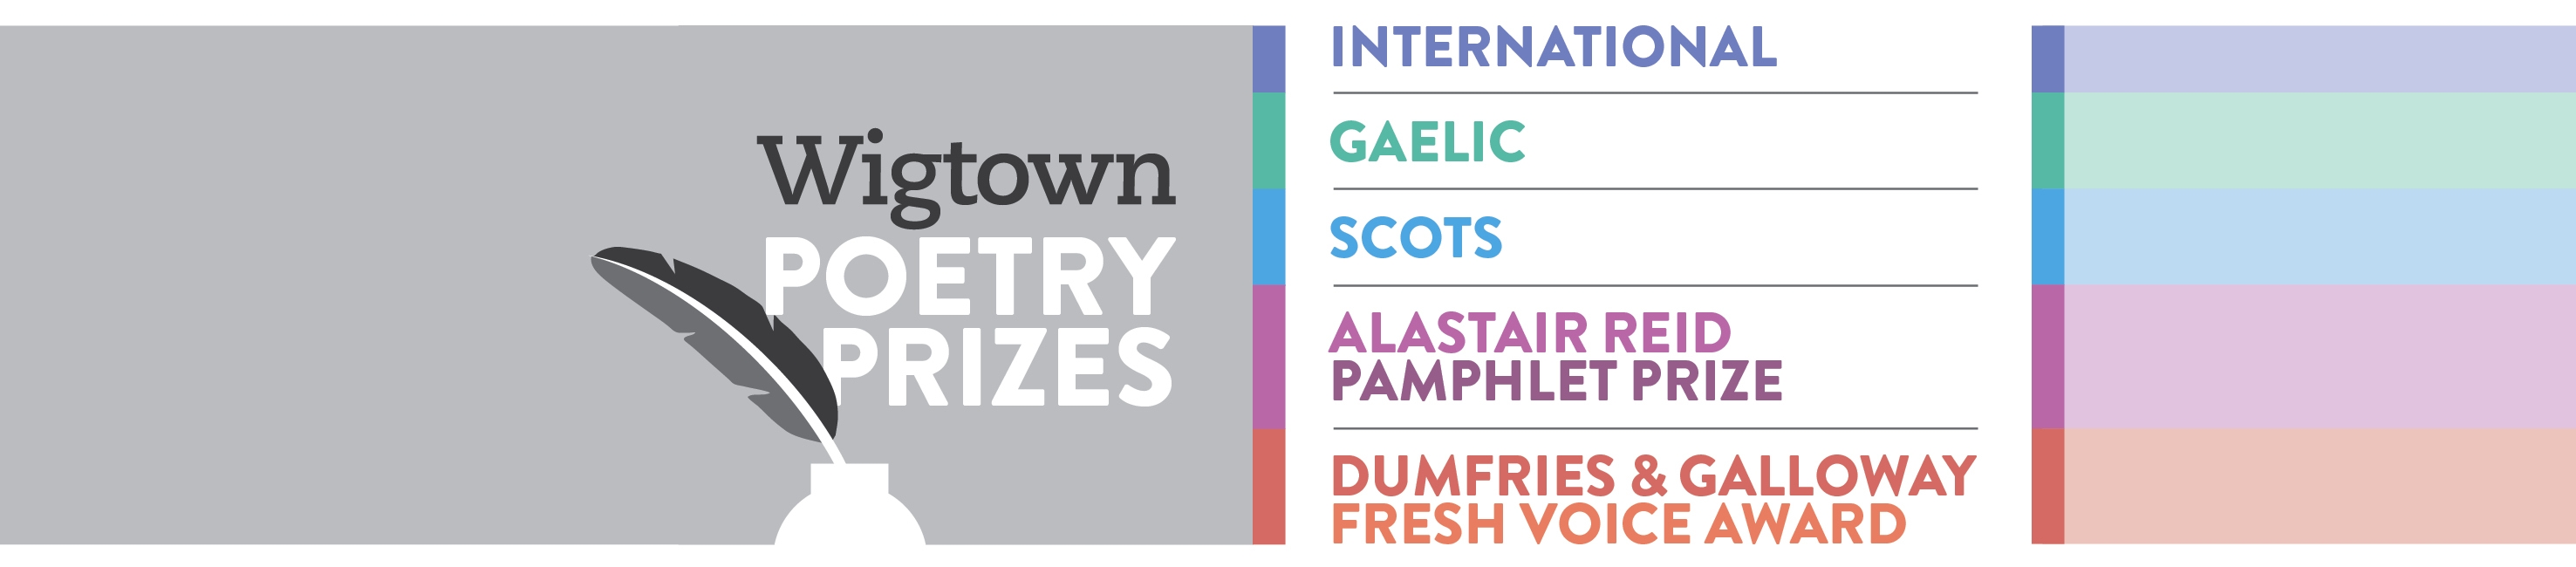 Wigtown poetry prize logo featuring category titles;  International, Gaelic. Scots. Alastair Reid Pamphlet prize and Dumfries and Galloway Fresh Voice Award.